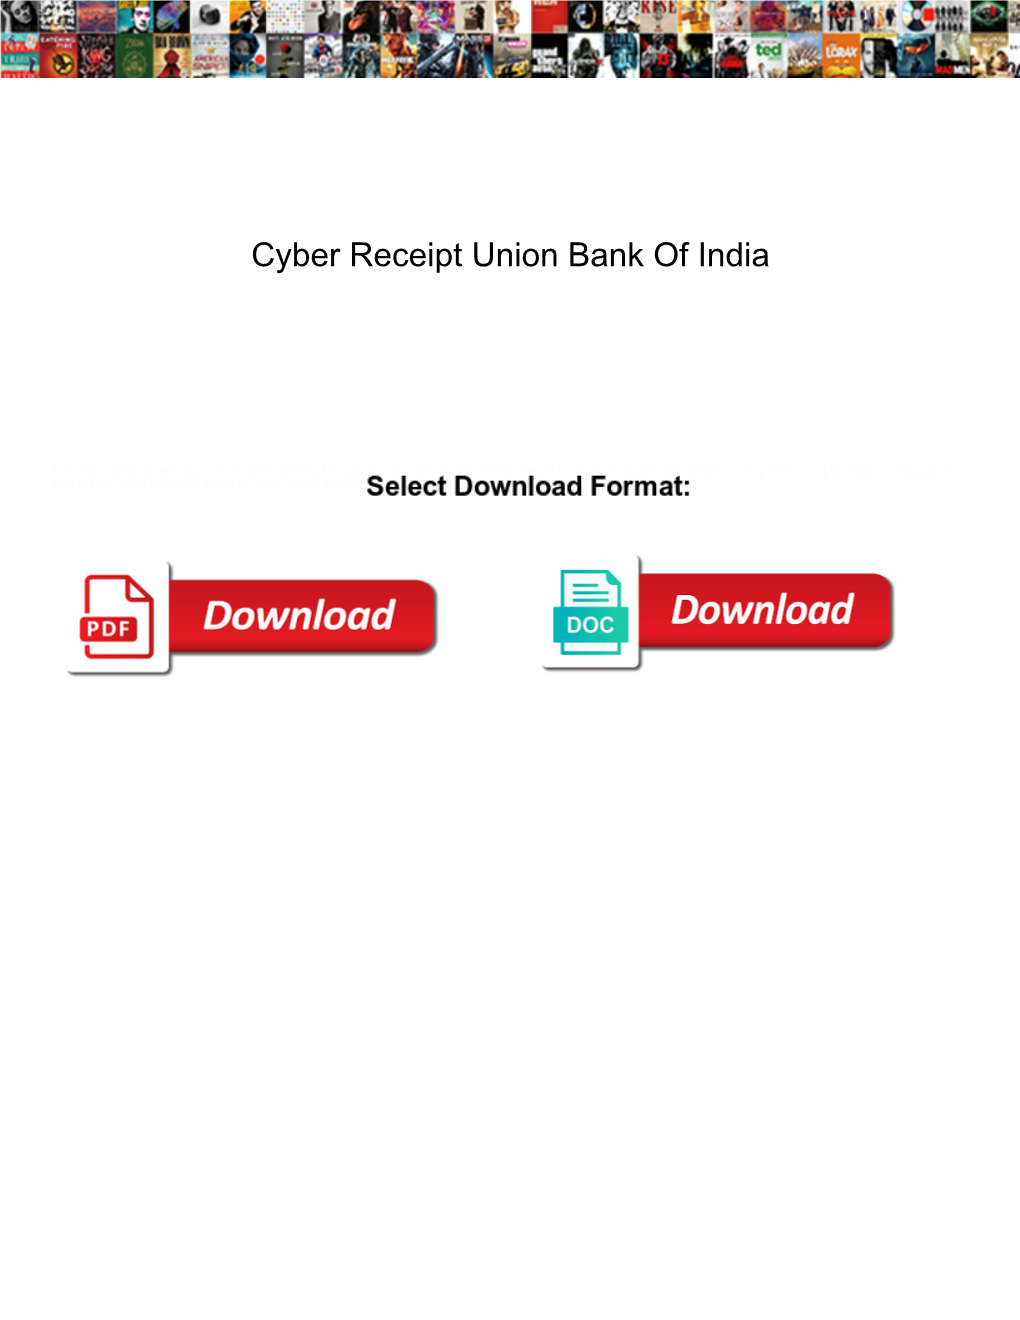 Cyber Receipt Union Bank of India